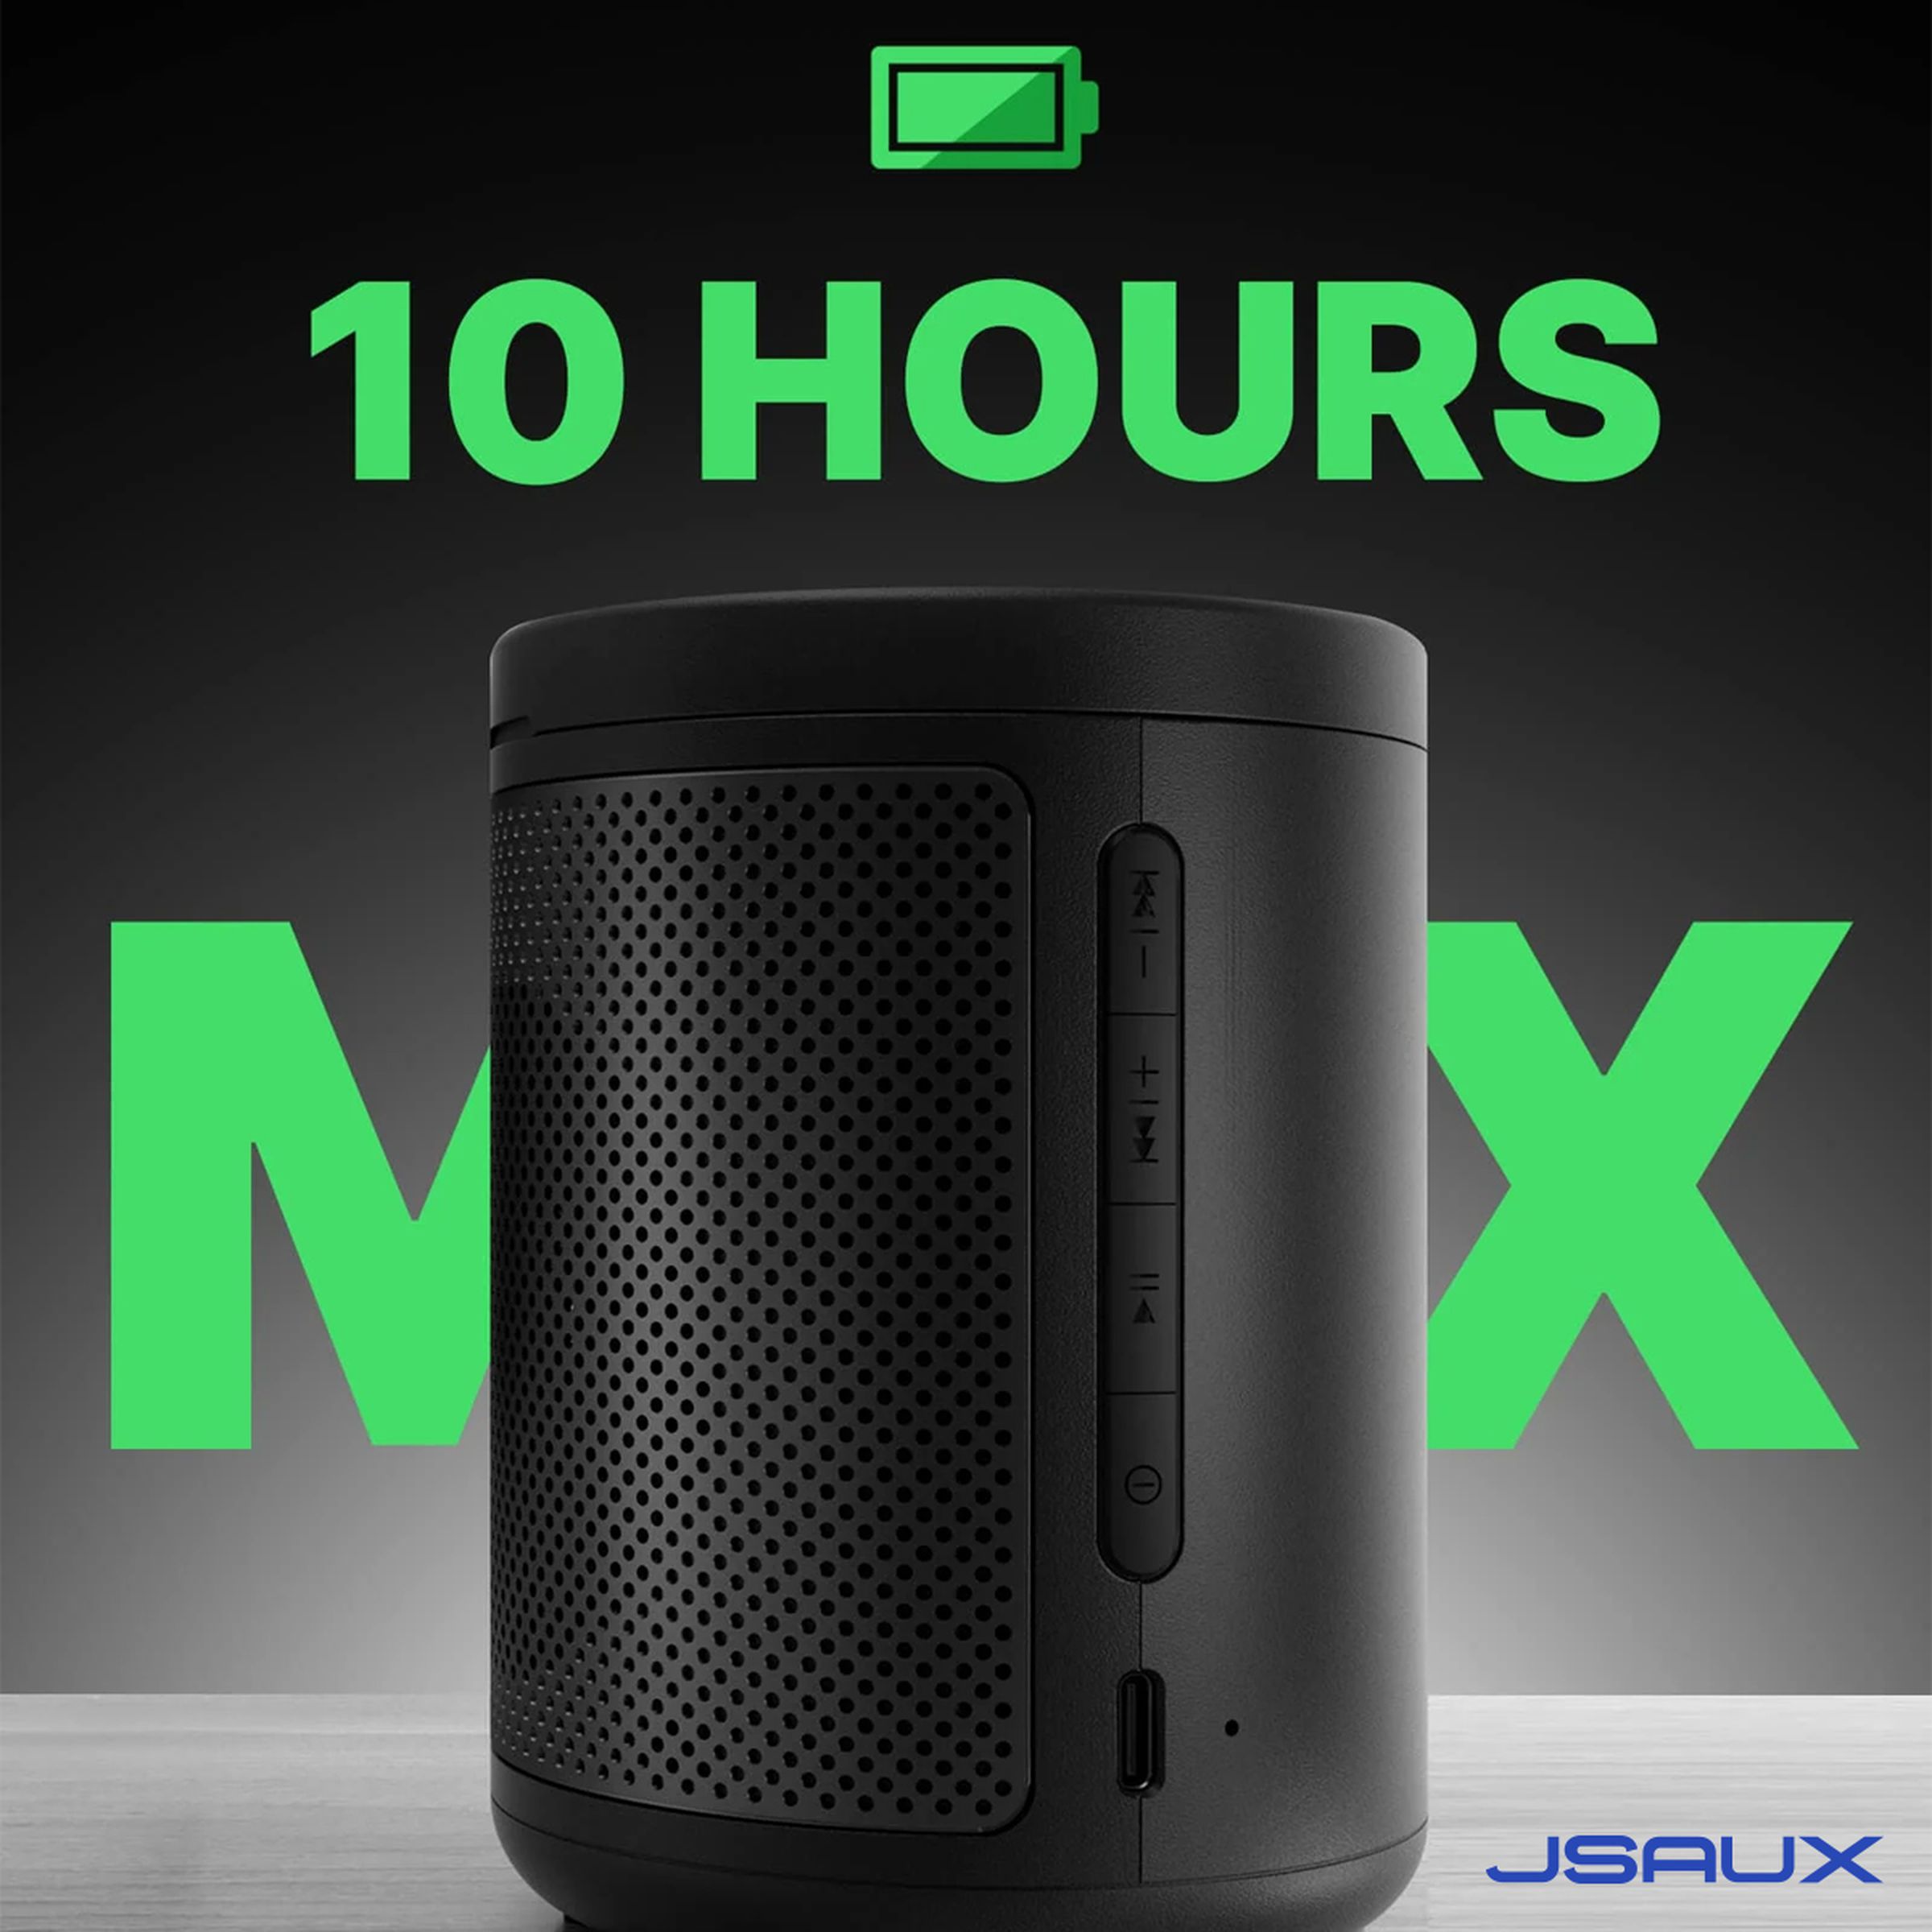 One of Jsaux’s next non-Steam Deck teases — a wireless speaker that can seemingly play two different songs simultaneously.